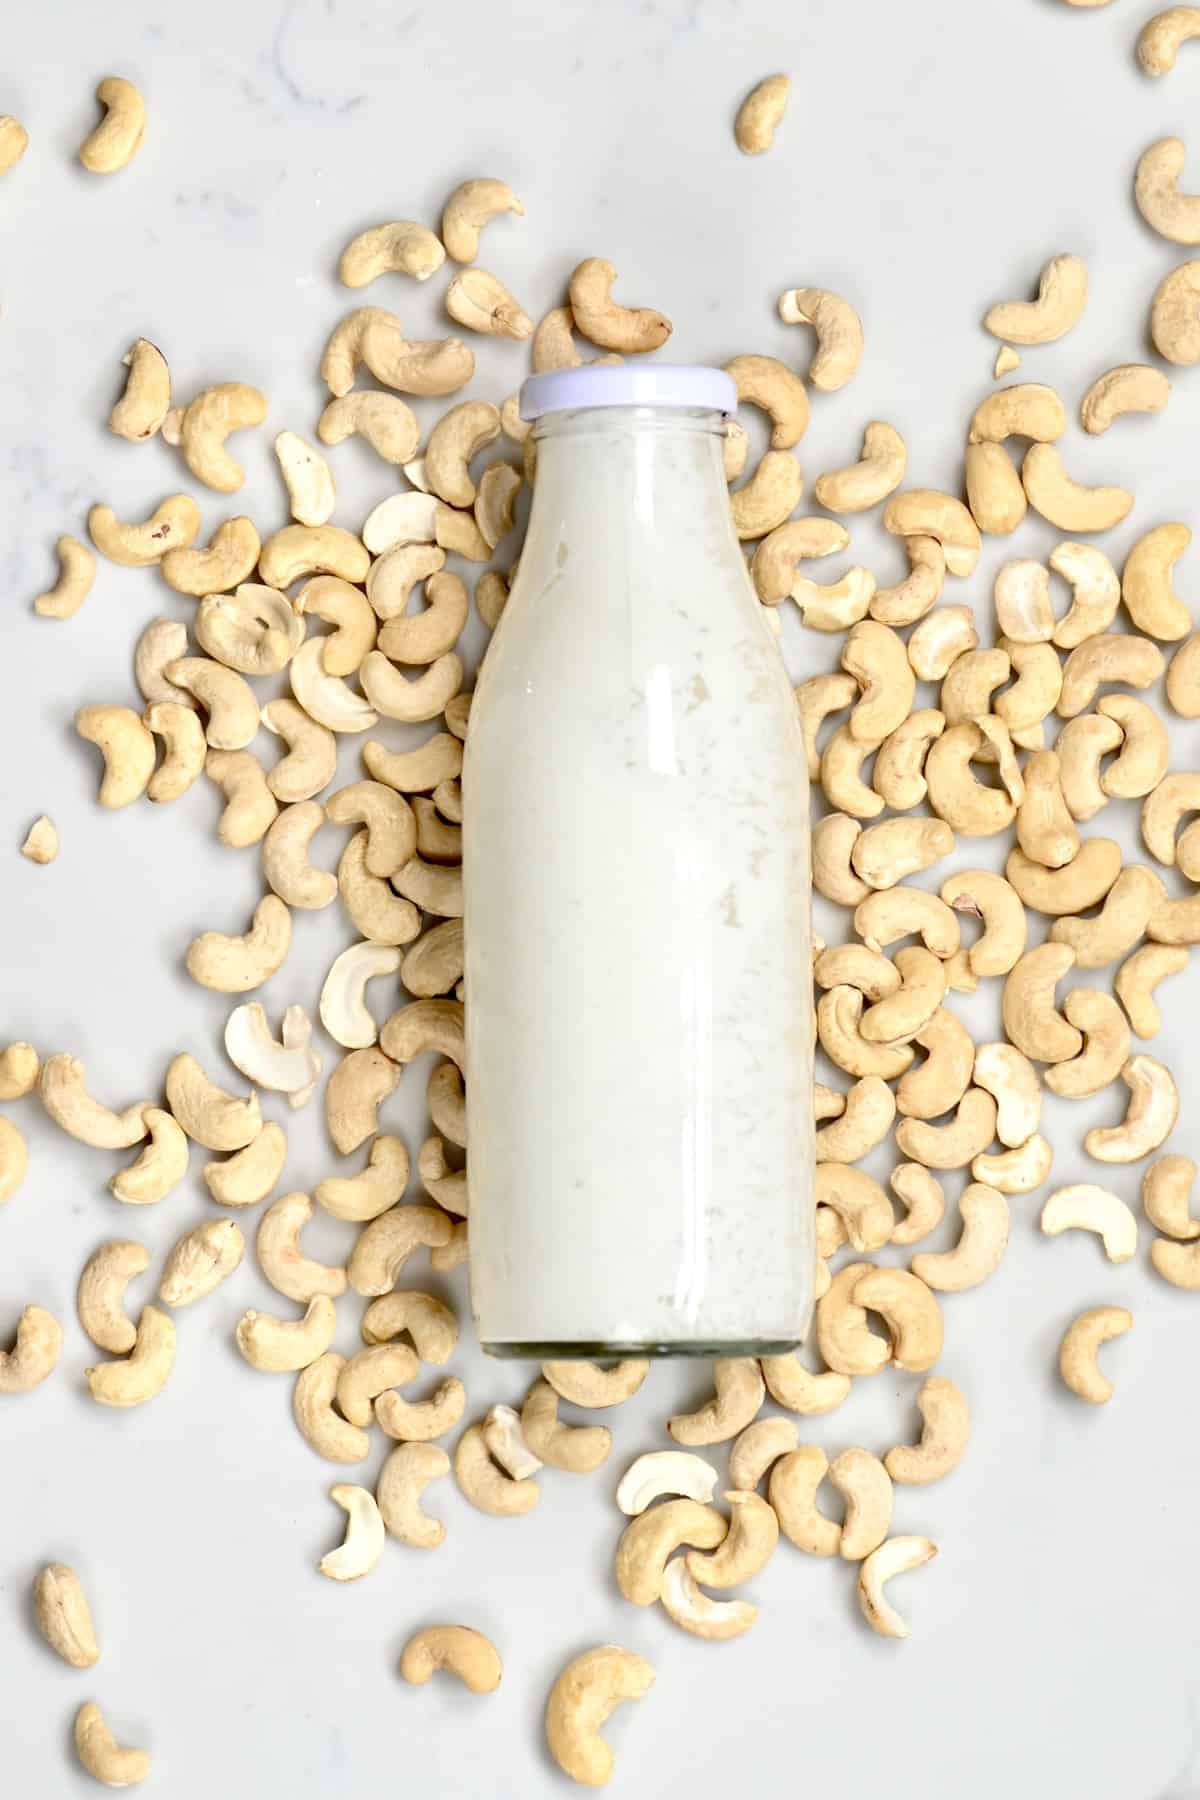 Cashew creamer in a glass bottle and cashew nuts next to it